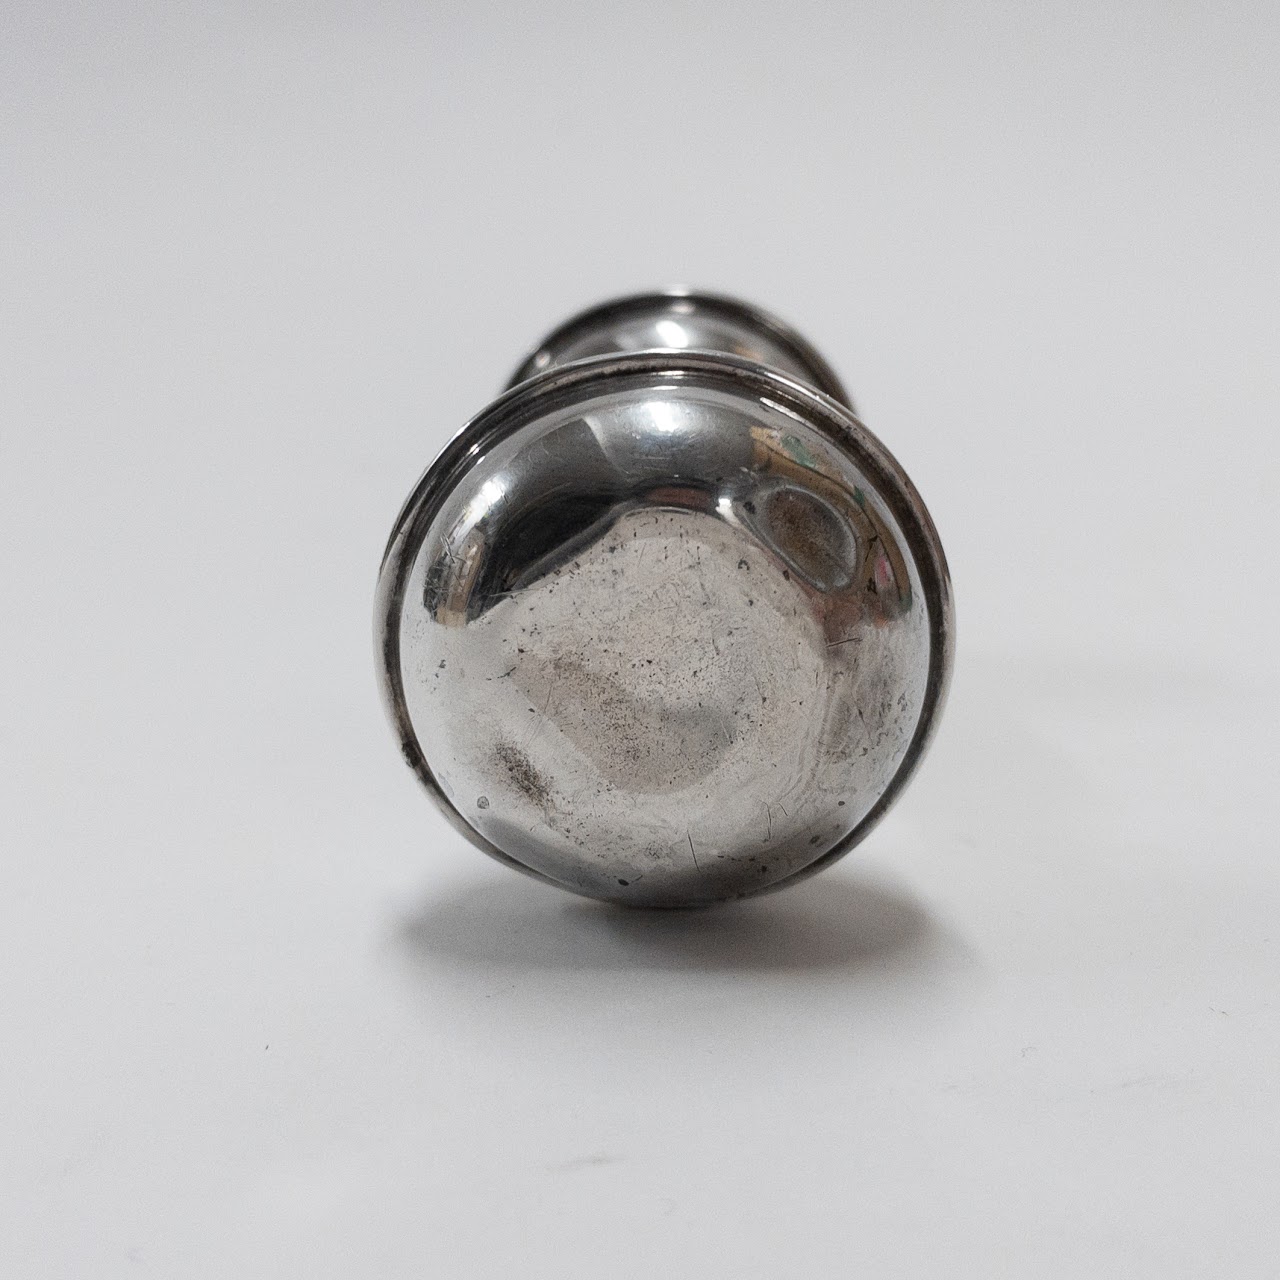 Shreve, Crump, & Low Sterling Silver Baby Rattle